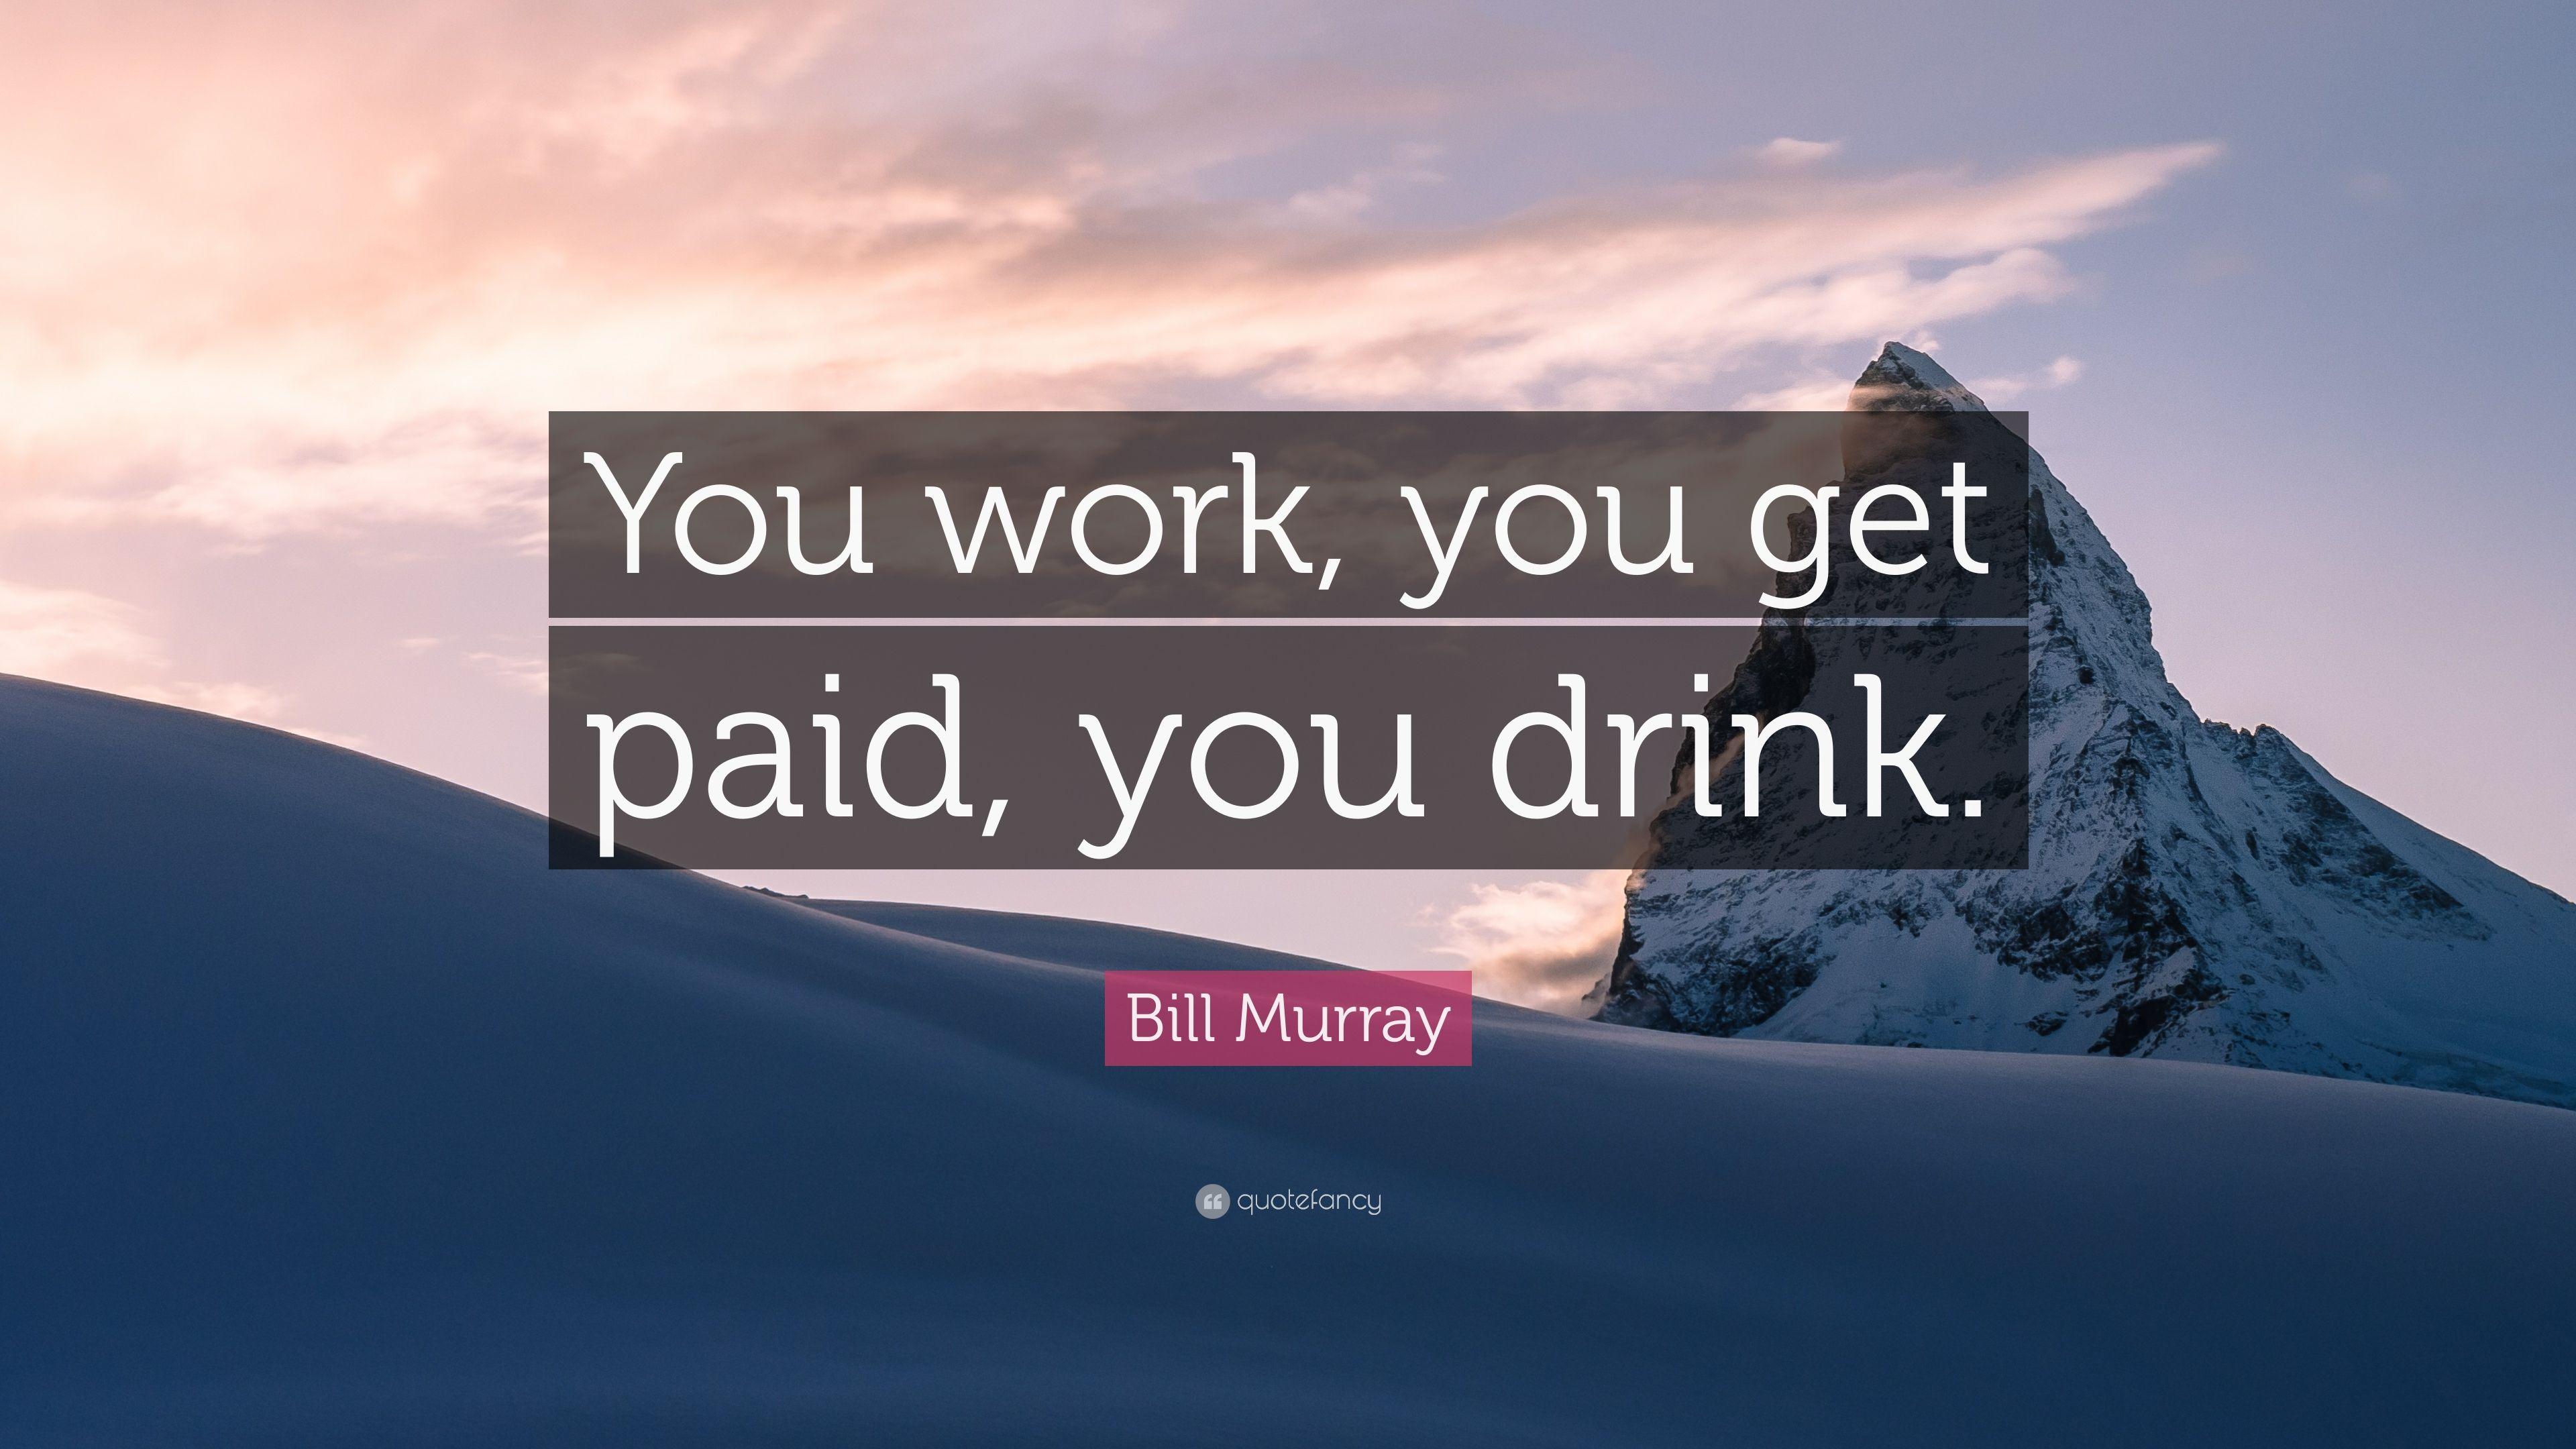 Bill Murray Quote: “You work, you get paid, you drink.” 7